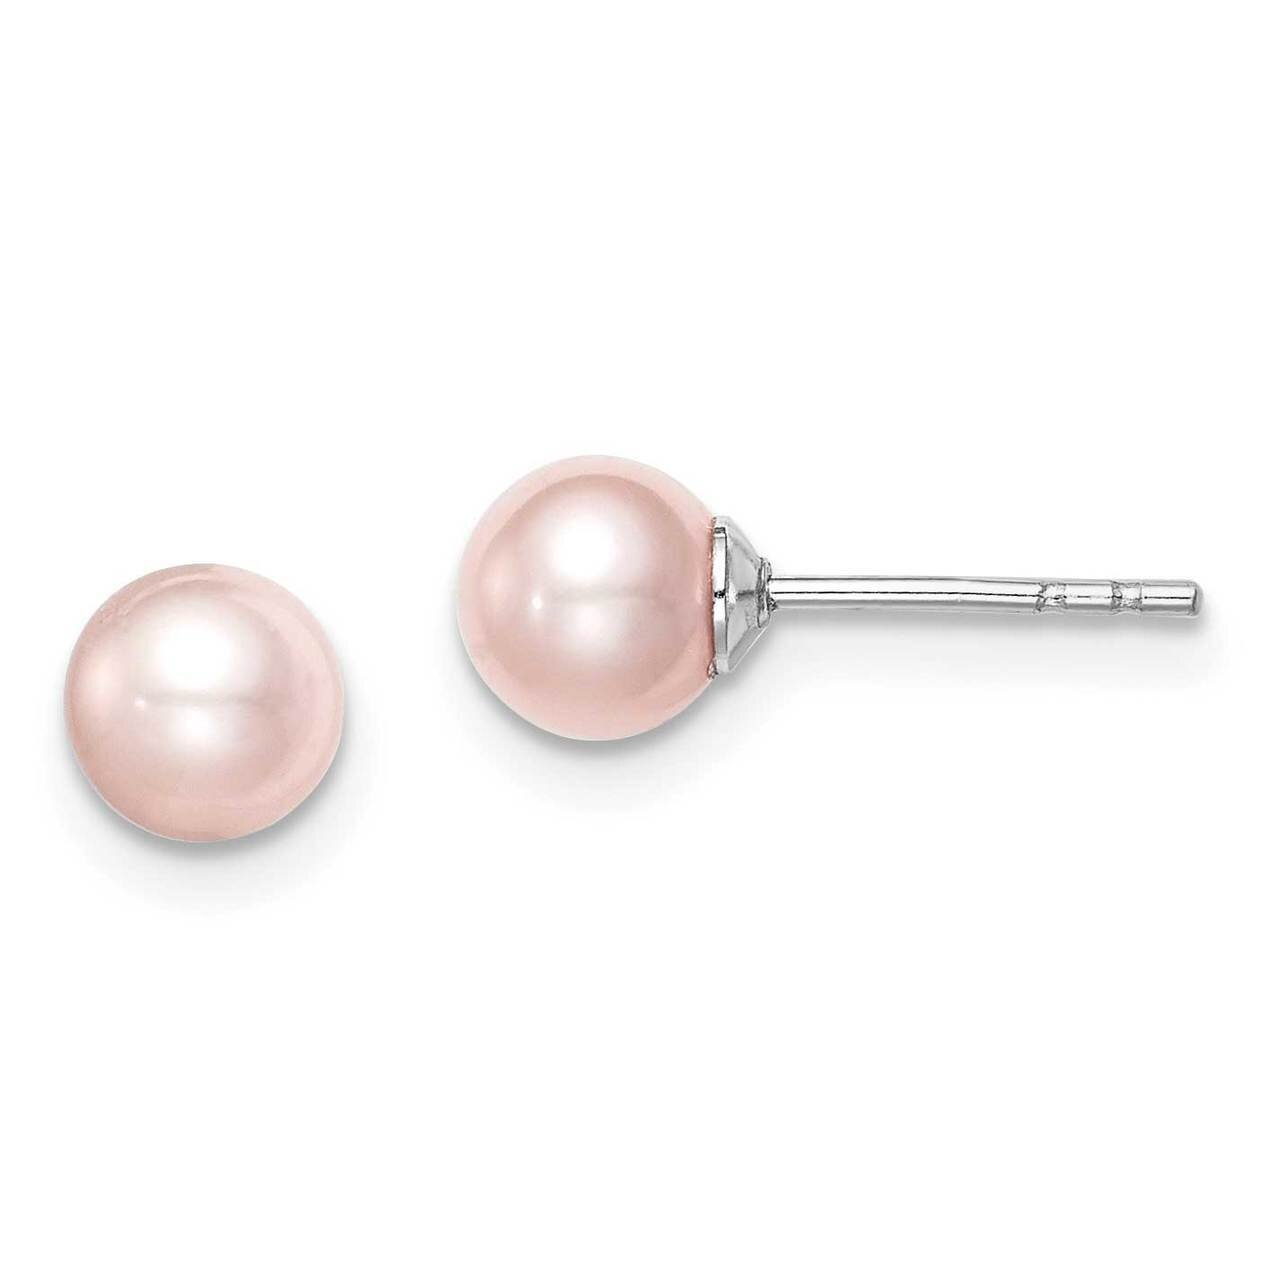 5-6mm Pink Round Freshwater Cultured Pearl Stud Earrings Sterling Silver Rhodium Plated QE15340